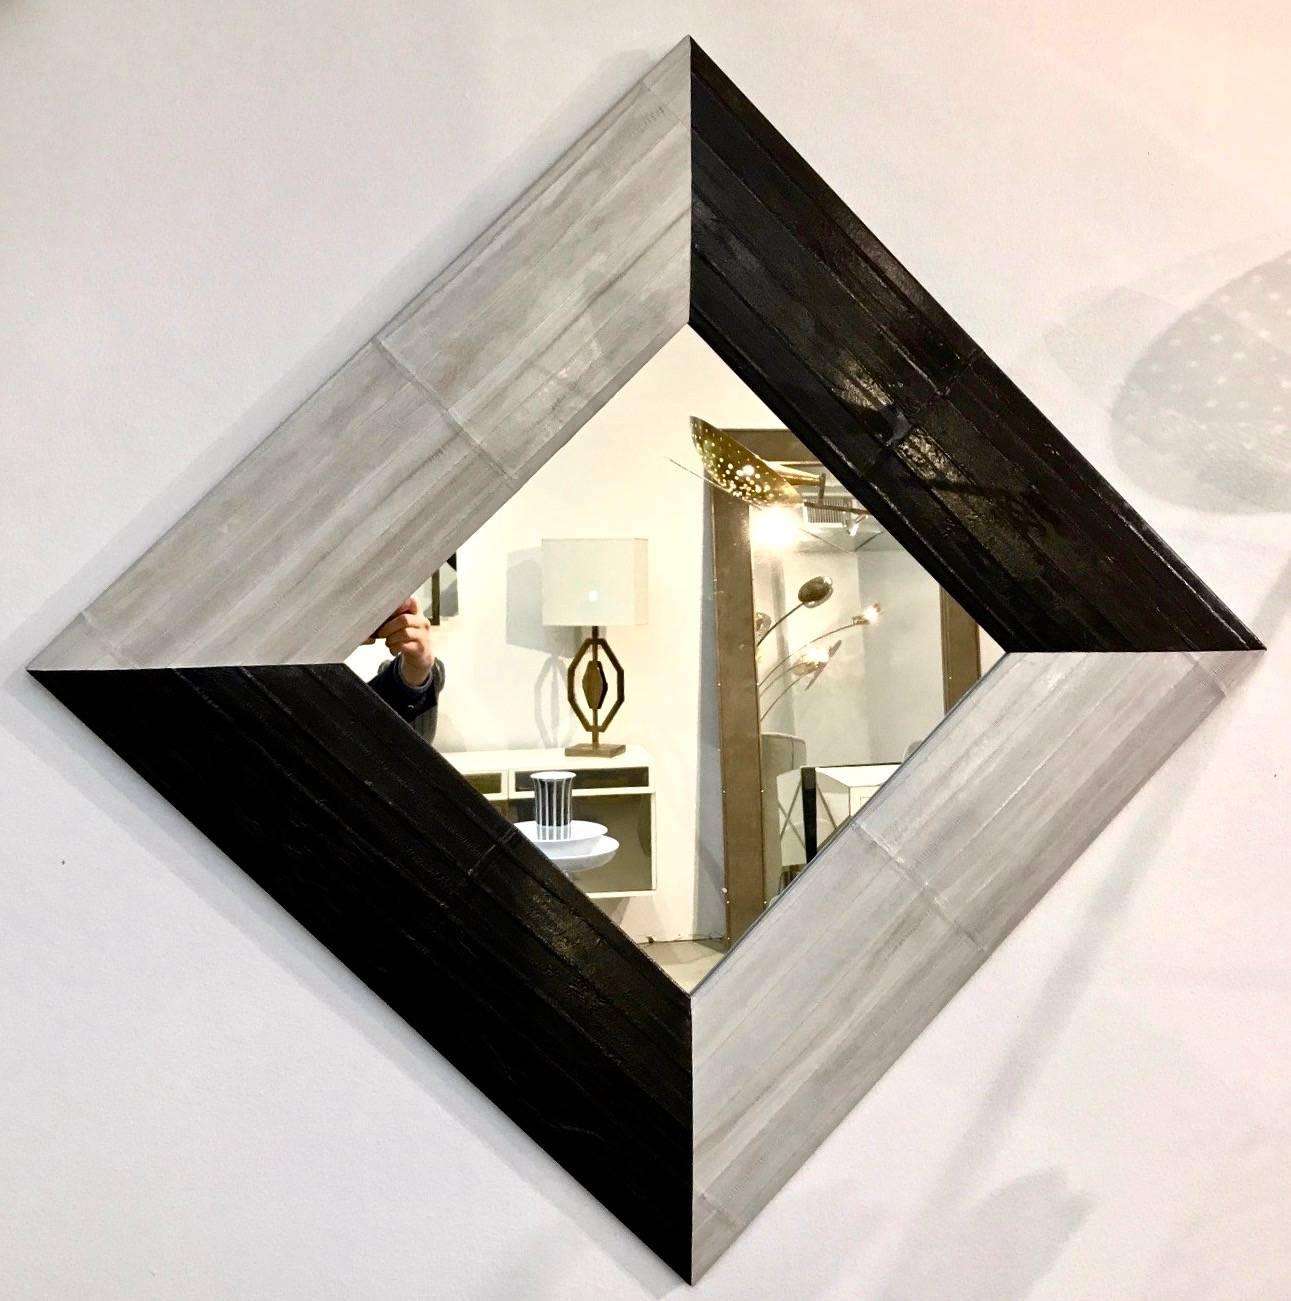 An Italian modern black and ivory grey/white square mirror, minimalist fine design, entirely handcrafted. The slightly convex wood frame is covered in a very elegant hand-stitched eel leather that gives the piece a luminous shimmer. It can be